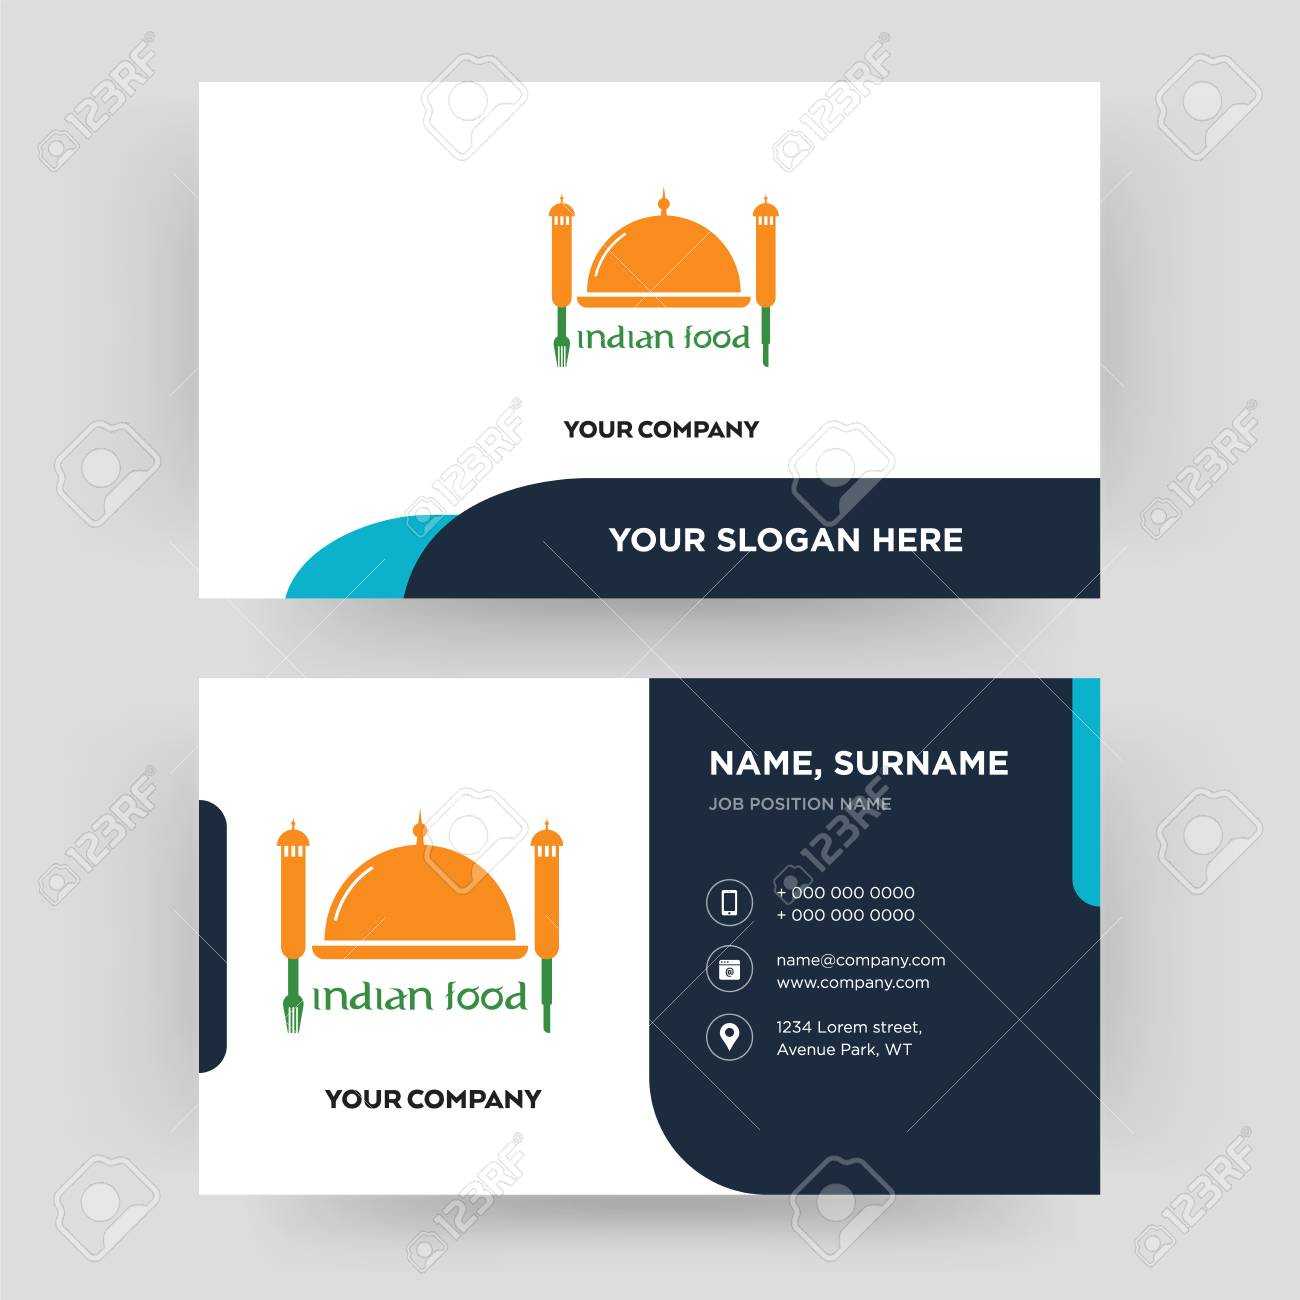 Indian Food, Business Card Design Template, Visiting For Your.. Within Food Business Cards Templates Free